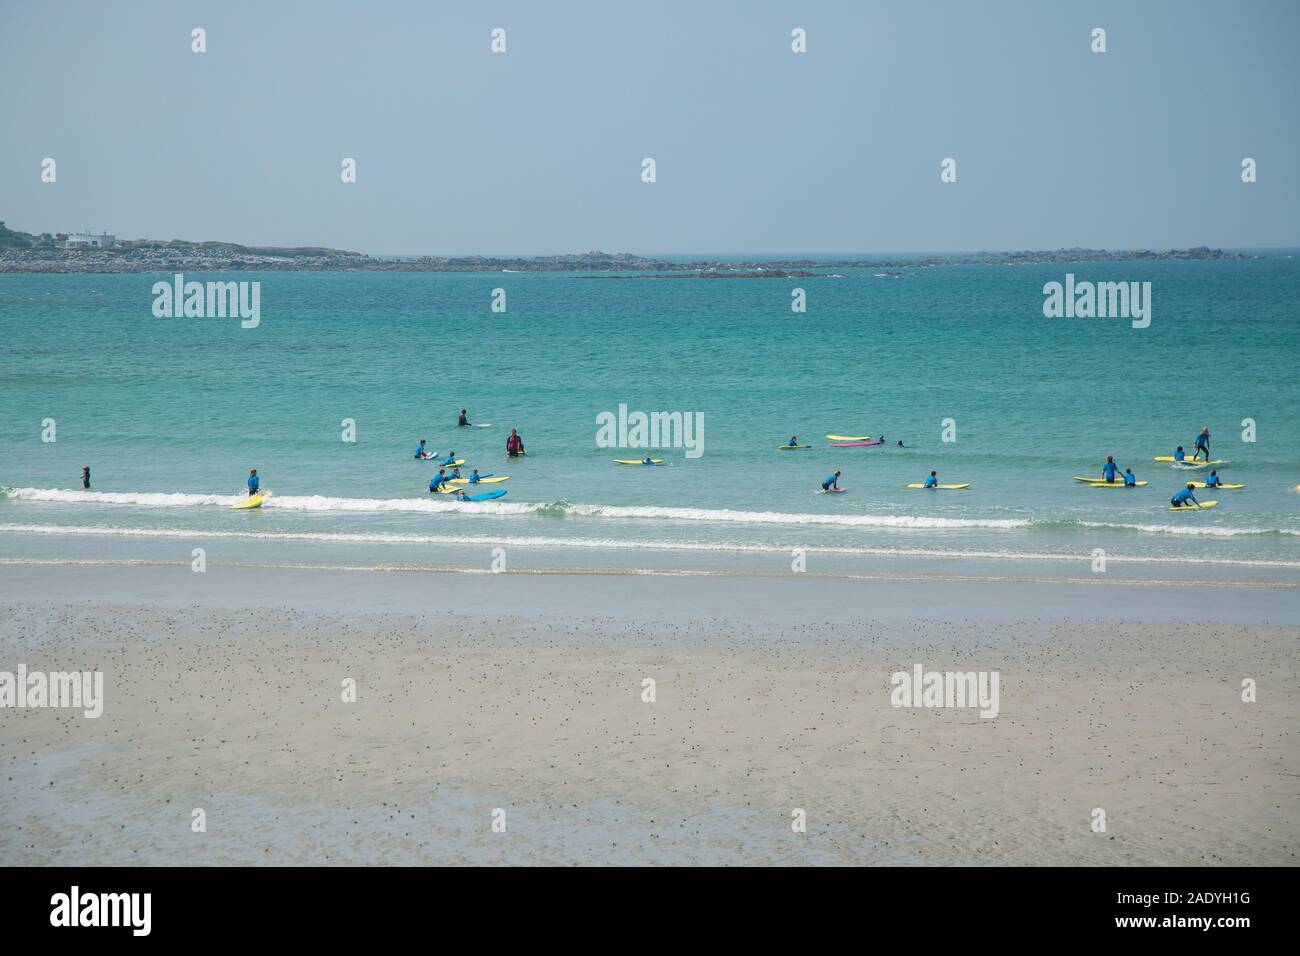 Blurred image of Surfers learning to Surf in surfing school, Guernsey, Channel Islands Stock Photo